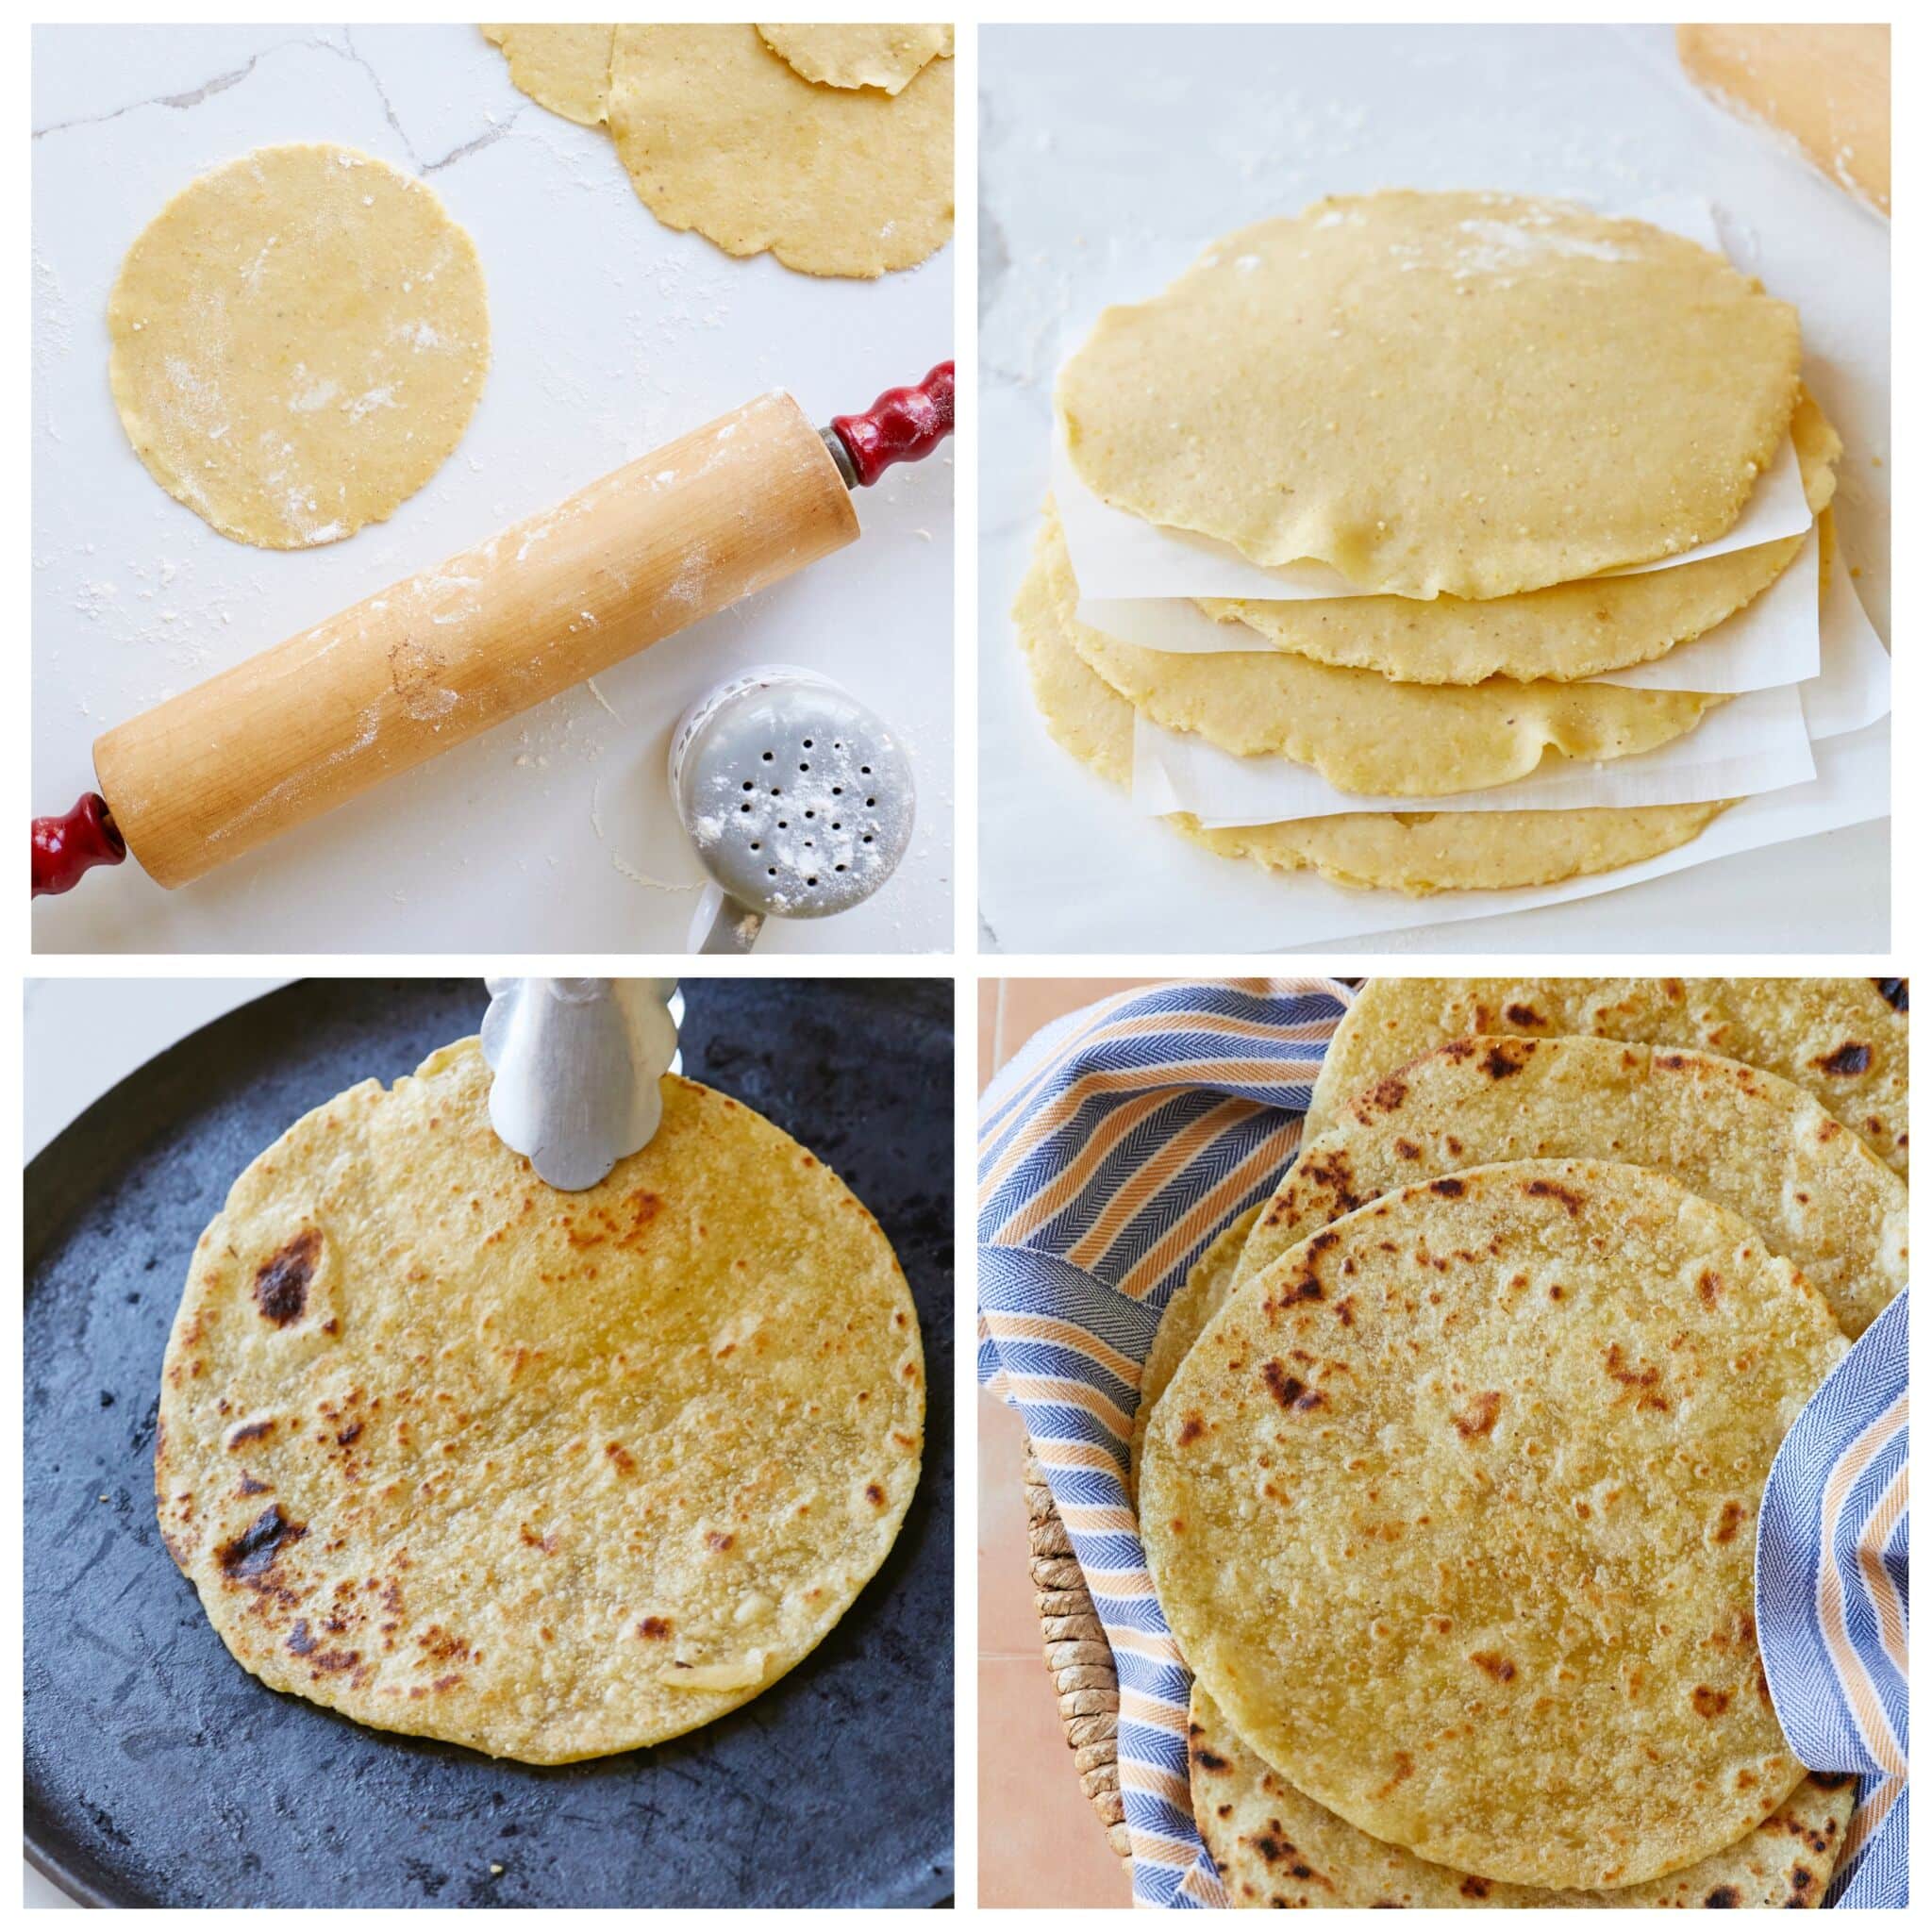 Step-by-step instructions on how to make Corn Tortillas: Preheat the pan while rolling out the dough balls into 6-inch circles. Put parchment paper in between to prevent sticking. Cook the tortillas for 30-45 seconds on each side. Flip the tortilla to cook the first side for a few more seconds to puff it up. Be sure to cover the finished tortillas with a clean kitchen towel while you finish cooking off the rest.